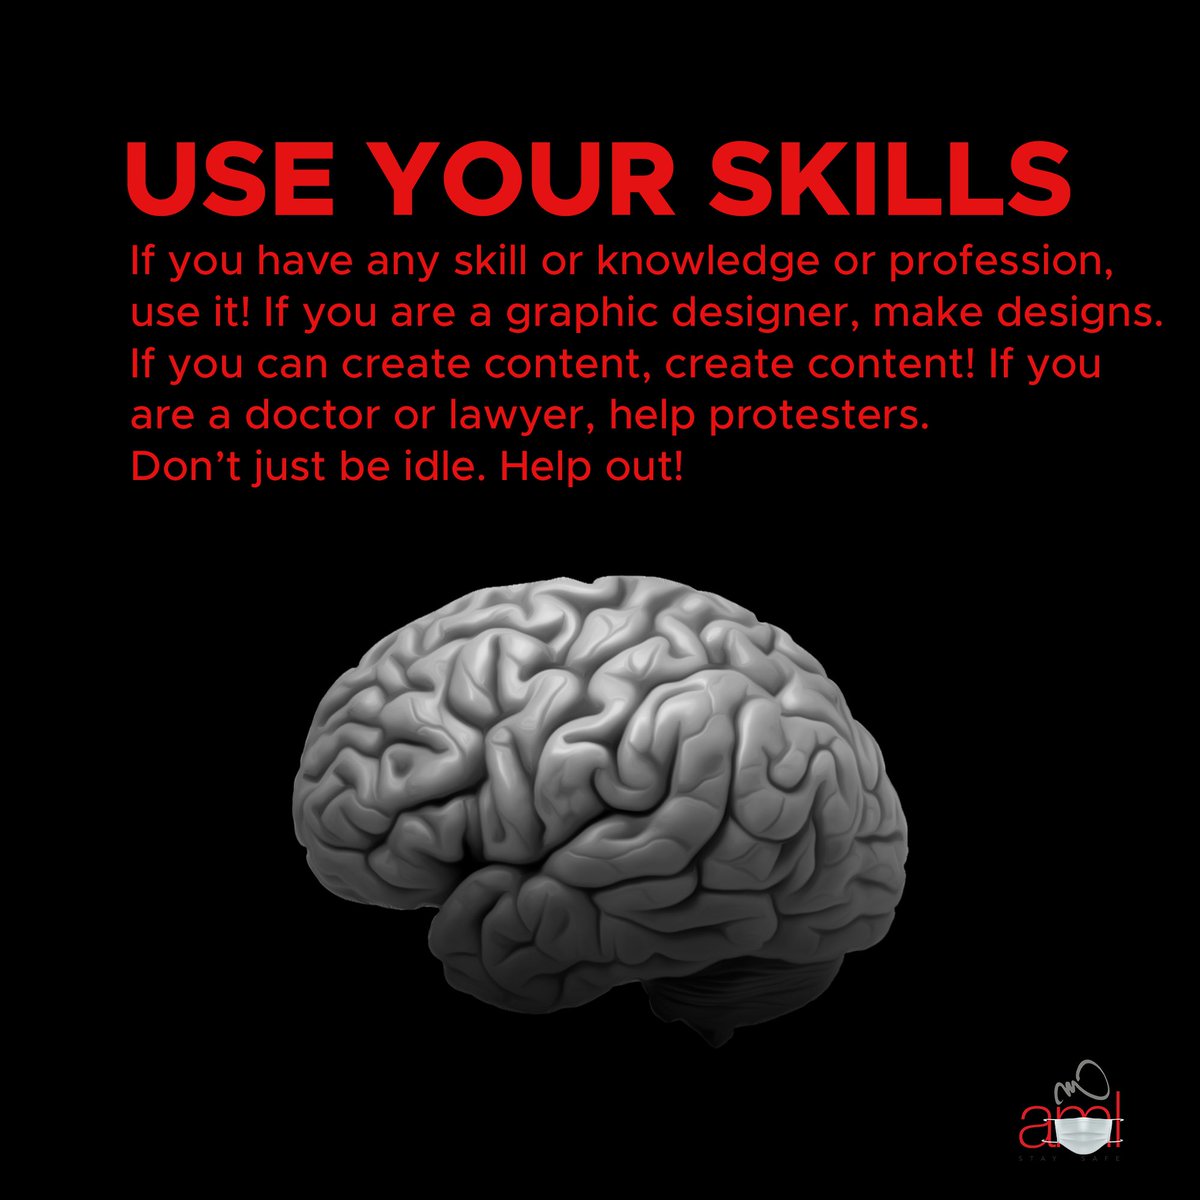 Use your skills: If you have any skill or knowledge or profession, use it! If you are a graphic designer, make designs. If you can create content, create content! If you are a doctor or lawyer, help protesters. Don’t just be idle. Help out!